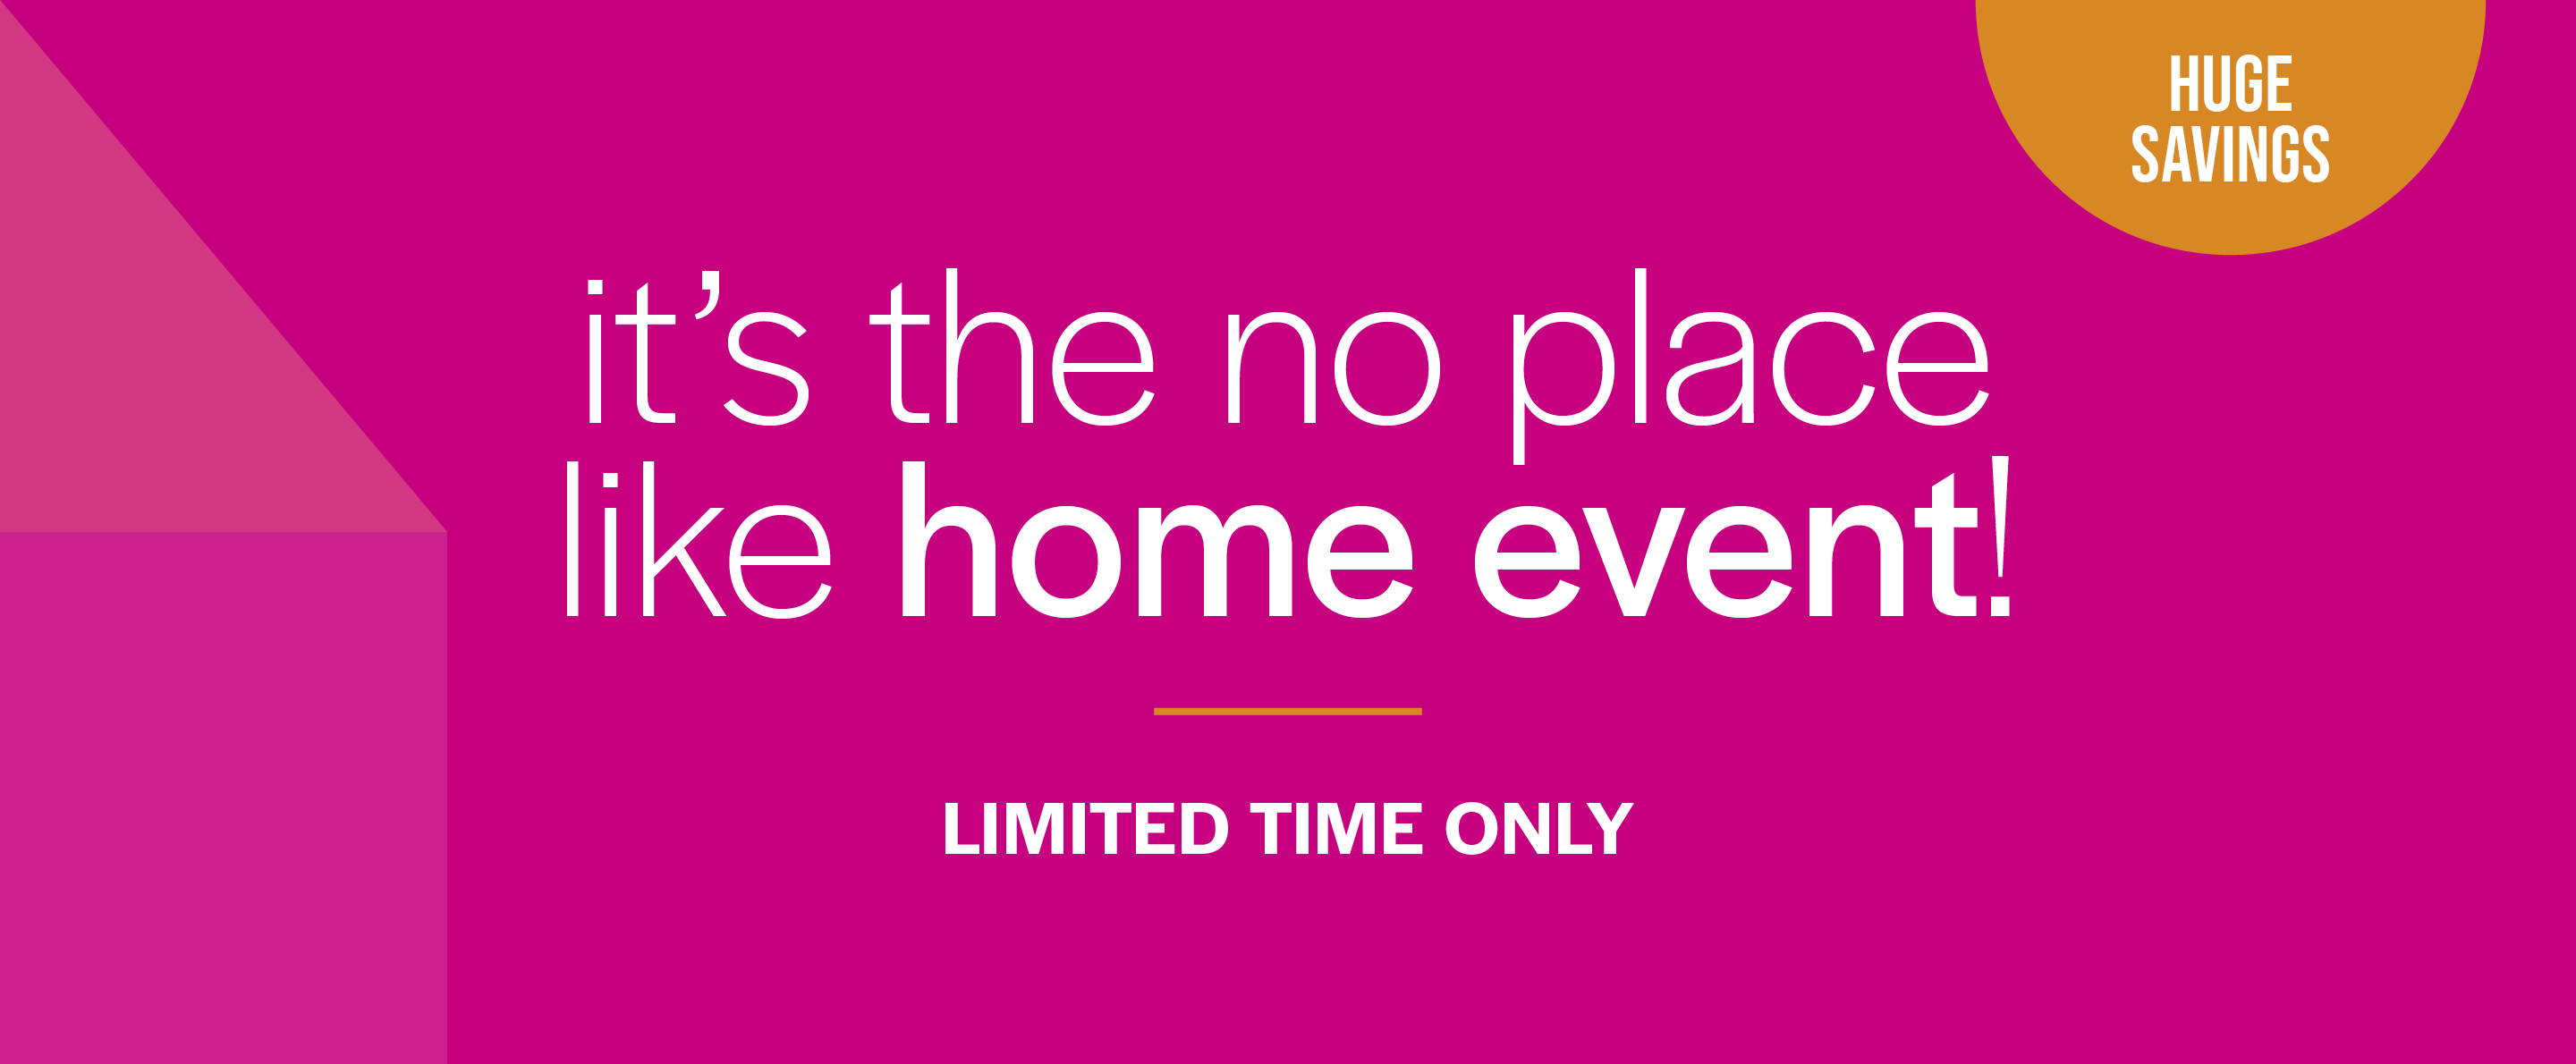 No place like home event graphic